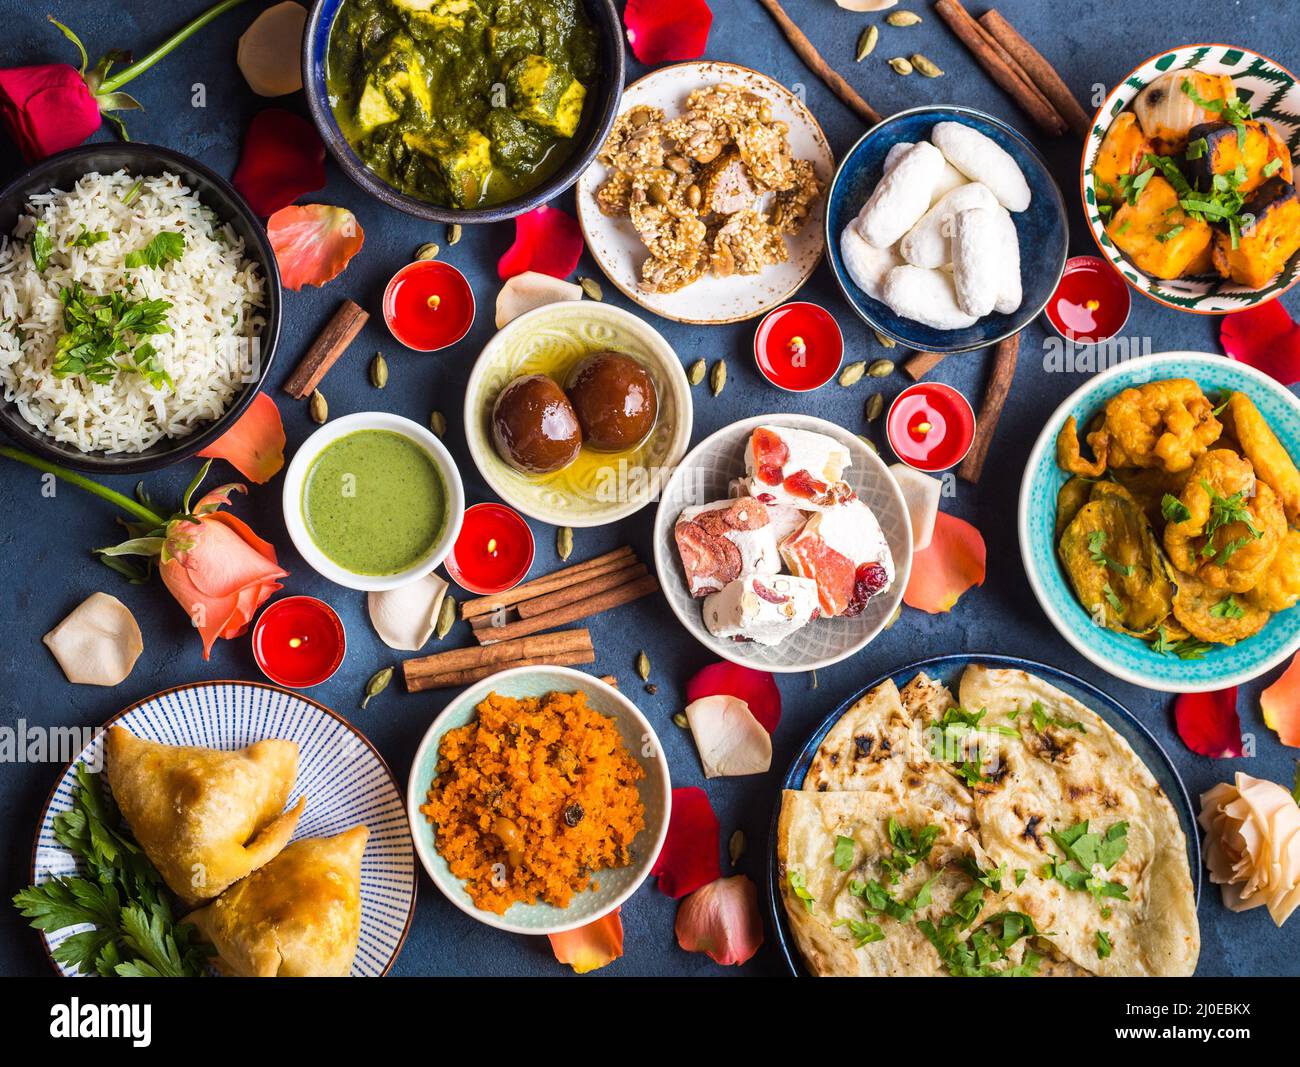 Food for Indian festival Diwali Stock Photo